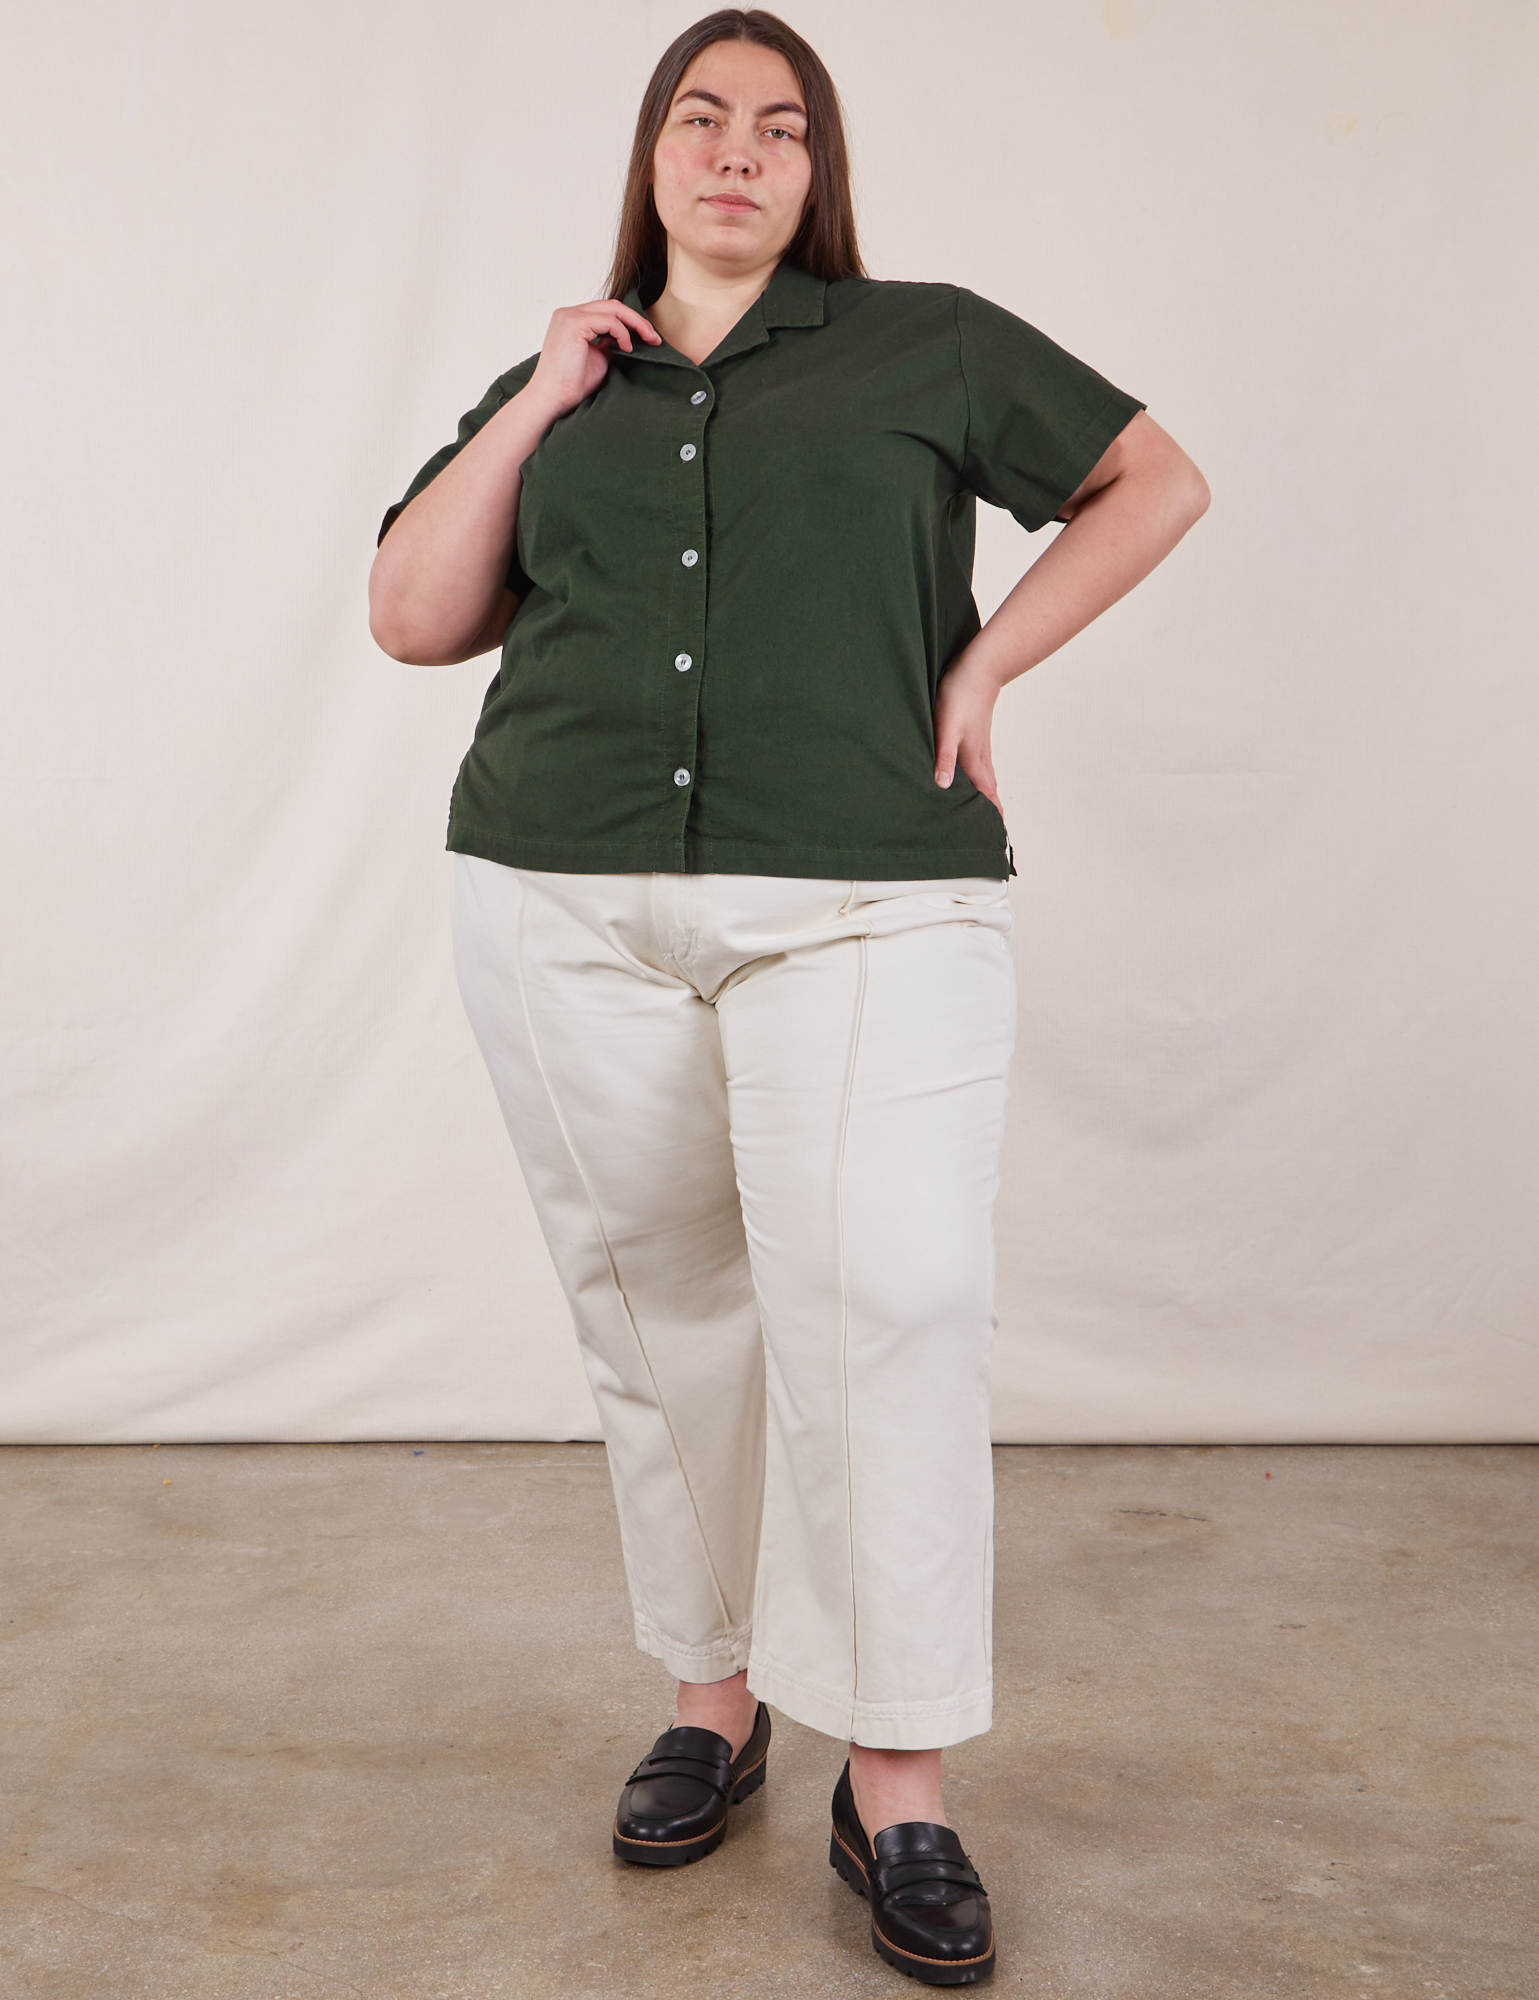 Marielena is wearing Pantry Button-Up in Swamp Green and vintage tee off-white Western Pants